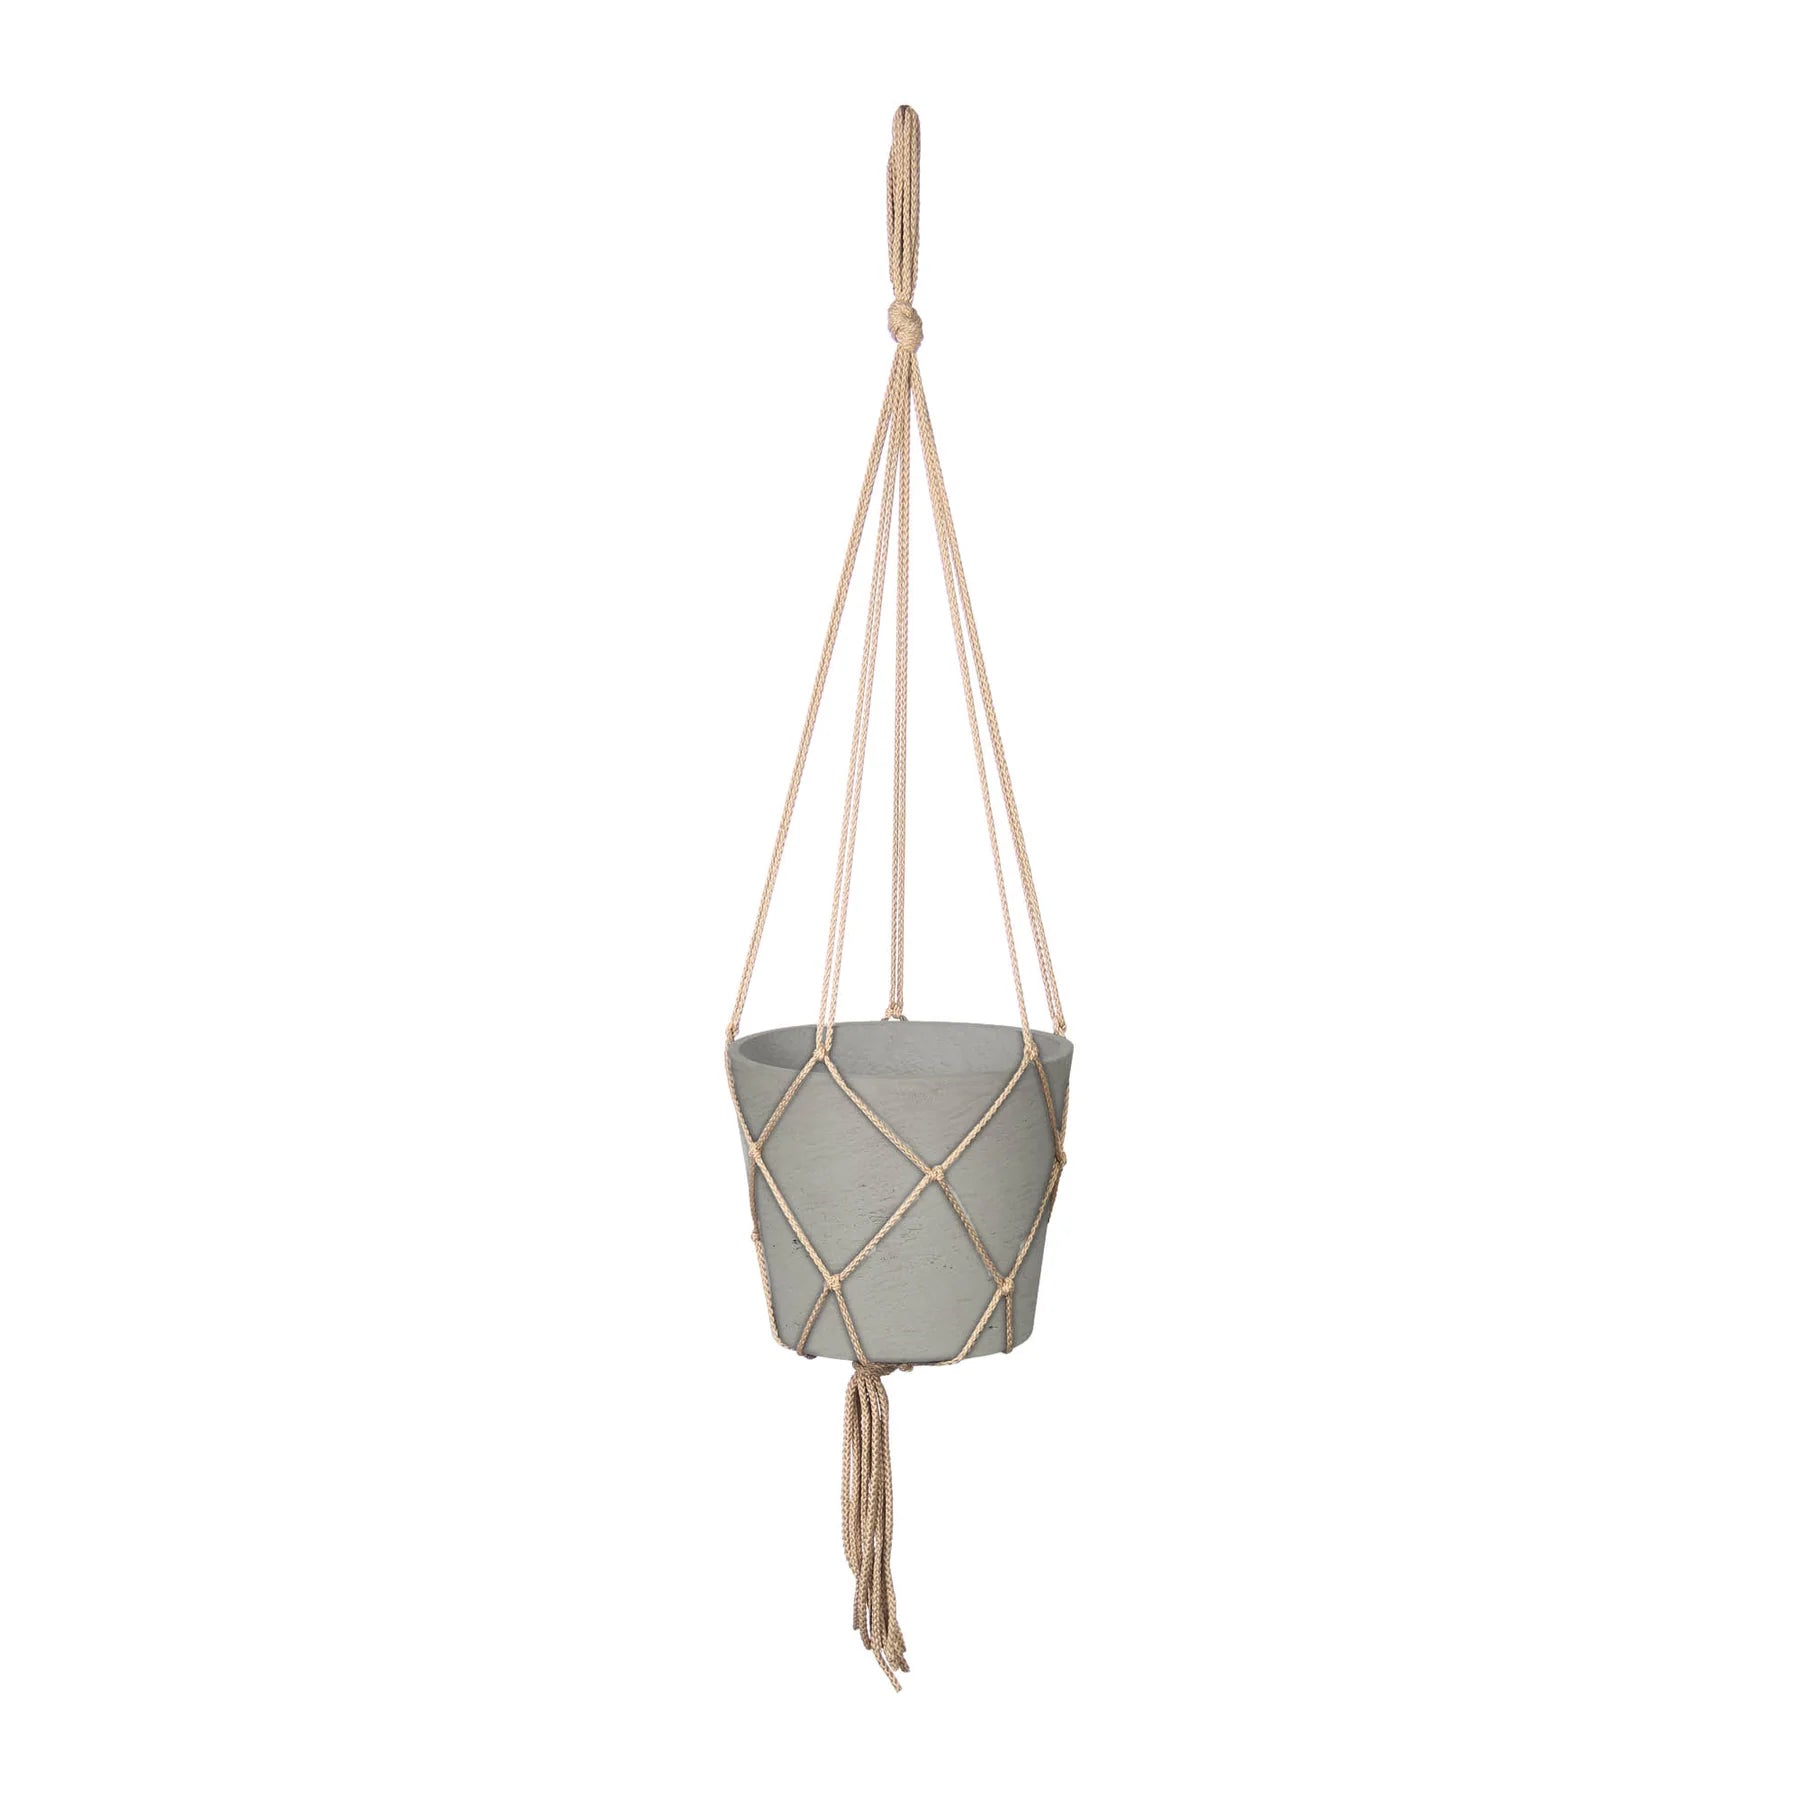 Picture of Craft Medium Hanging Pot With Netting - Cement Grey